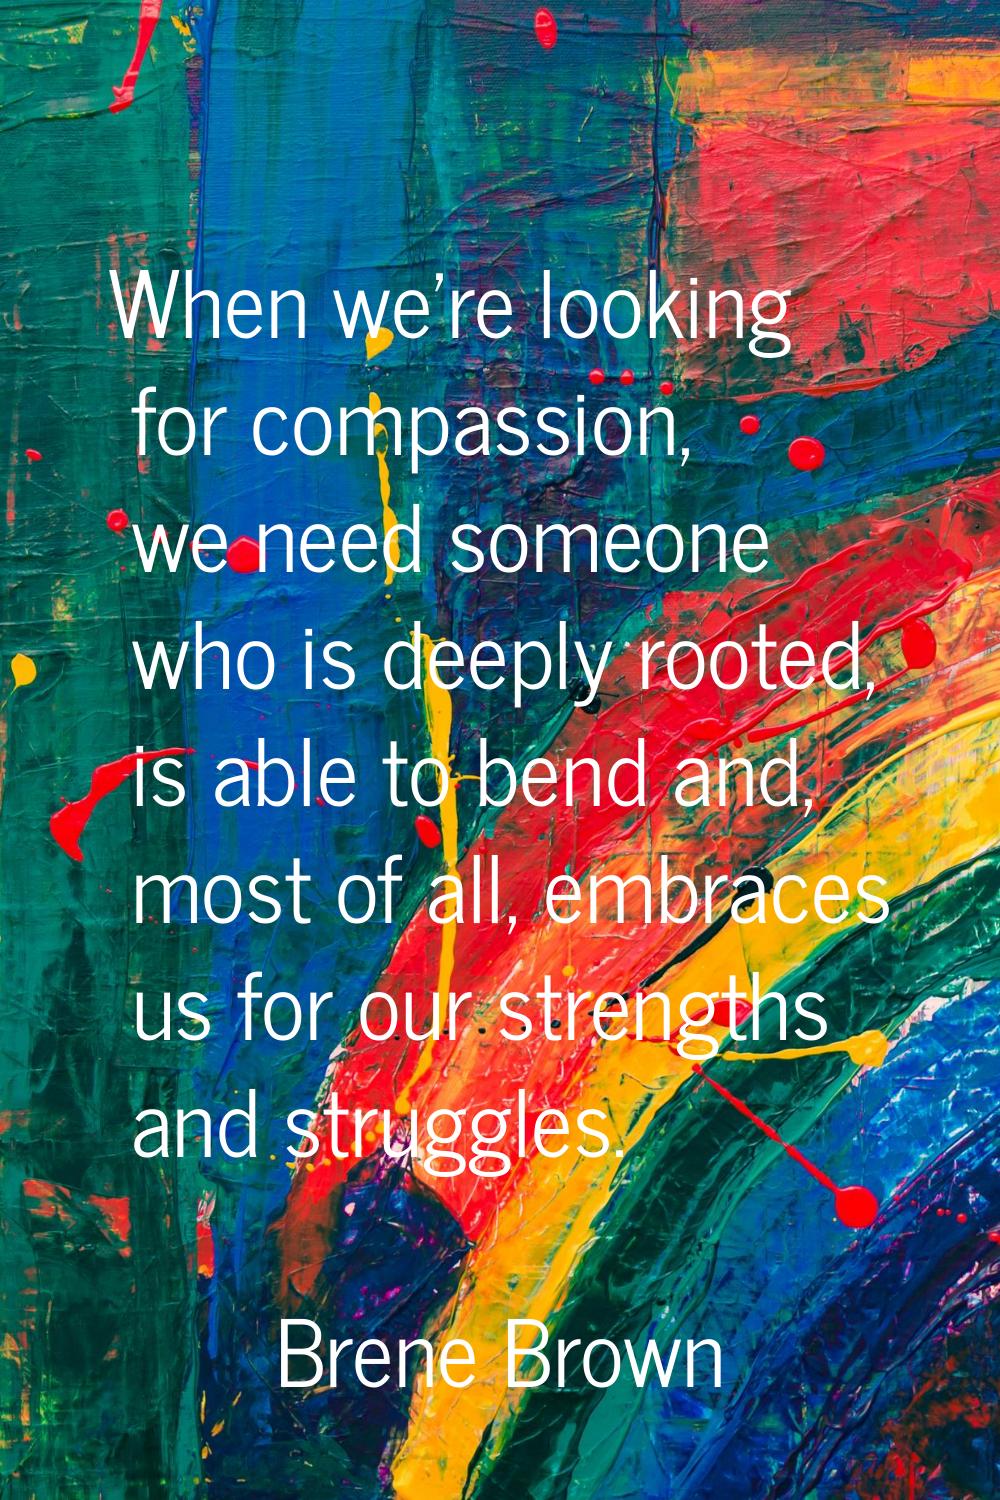 When we're looking for compassion, we need someone who is deeply rooted, is able to bend and, most 